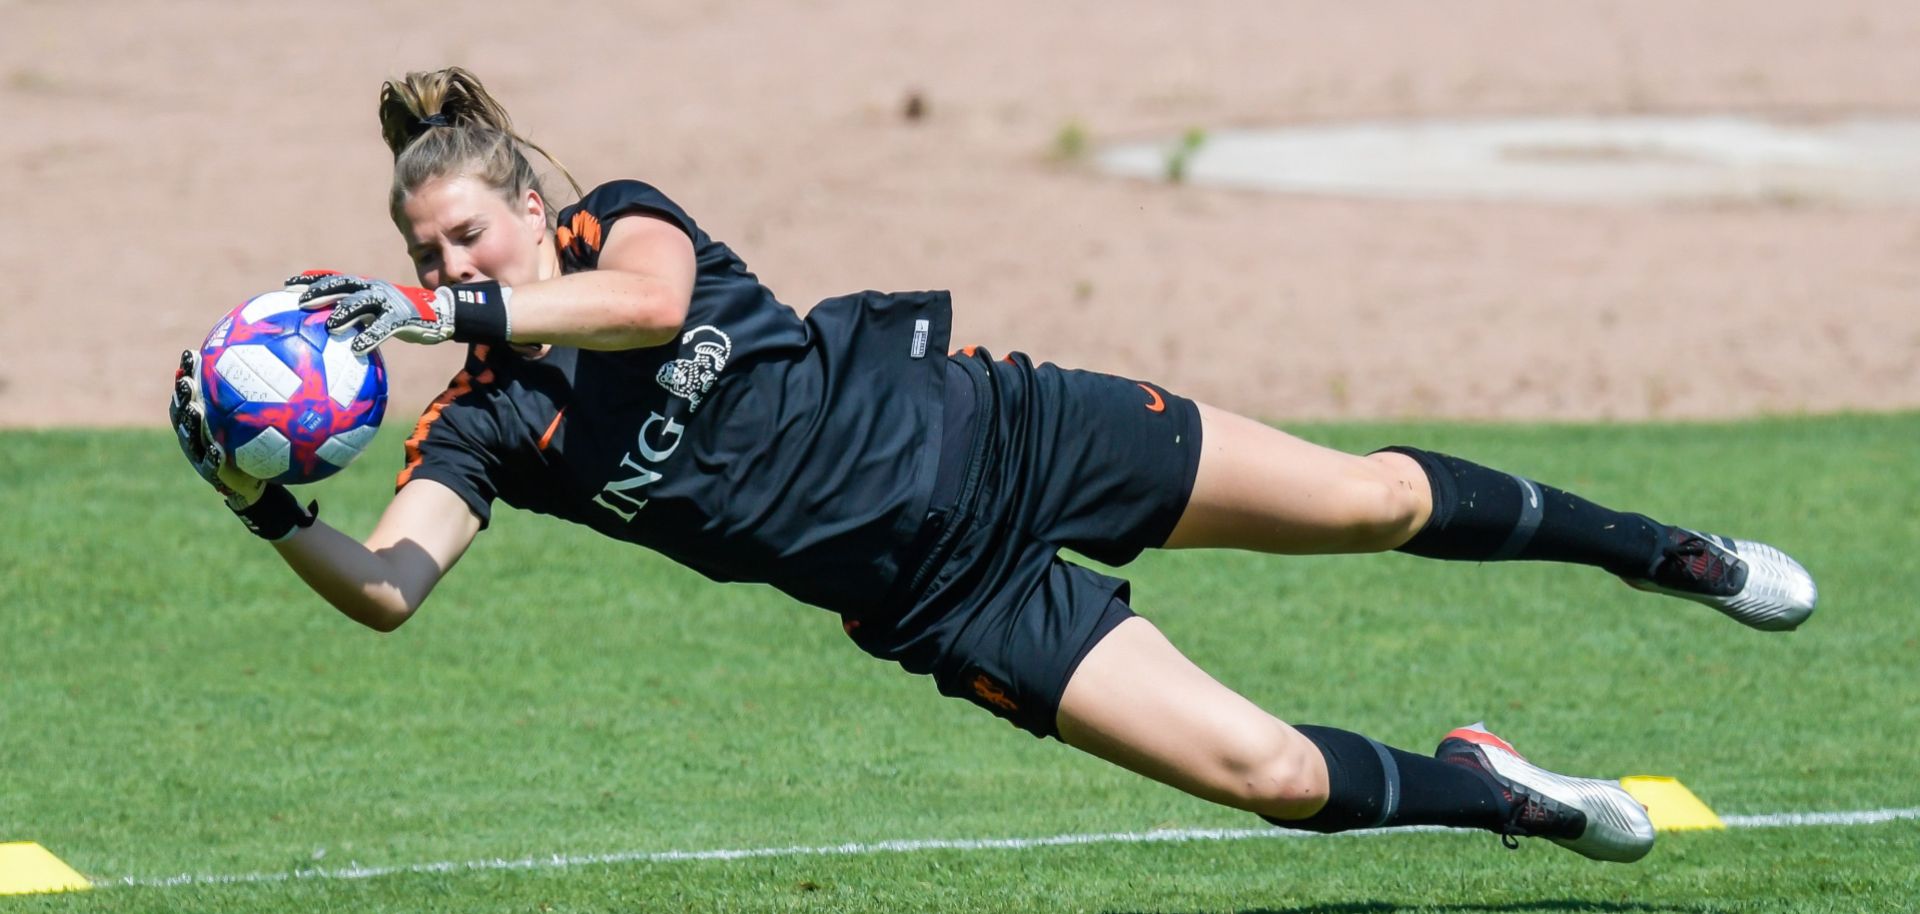 Netherlands goalkeeper Lize Kop works out before her team's appearance in the Women's World Cup championship game